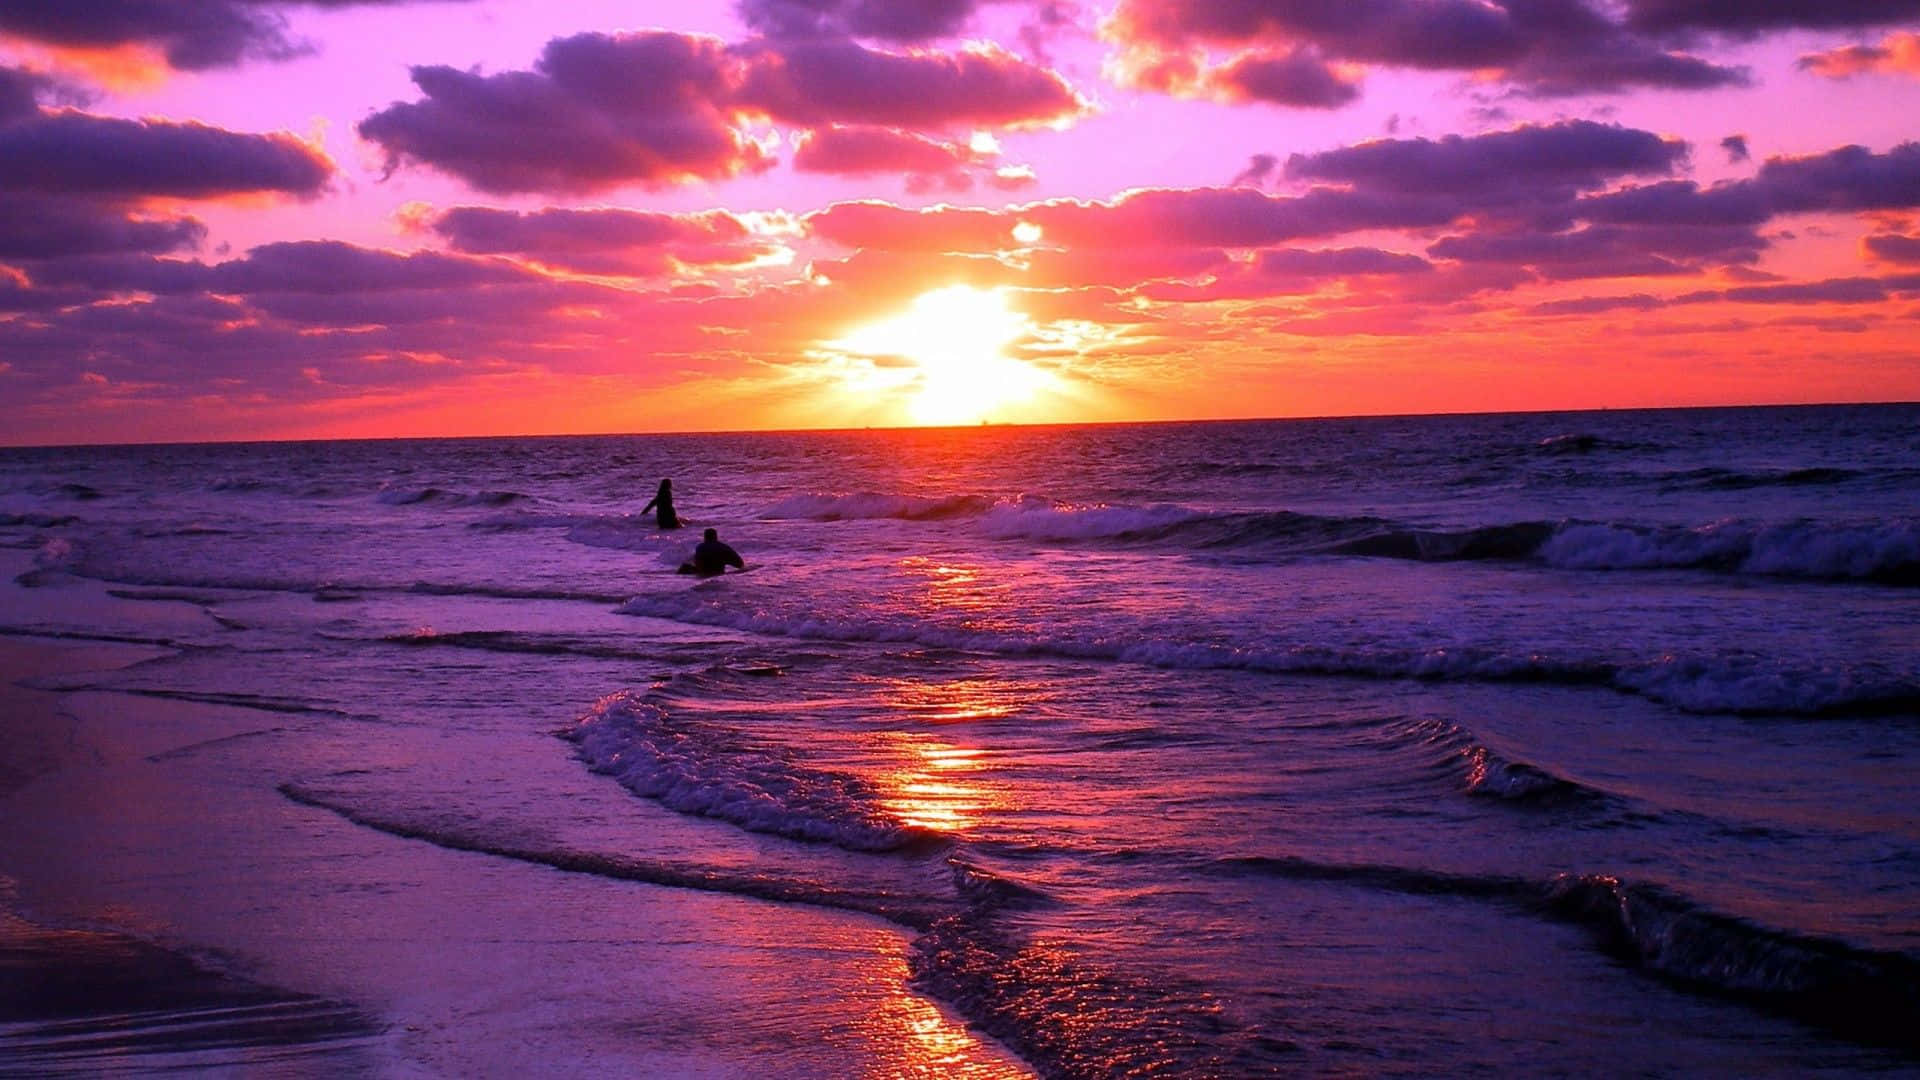 "Take in the Golden Light of the Setting Sun at Sunset Wave" Wallpaper